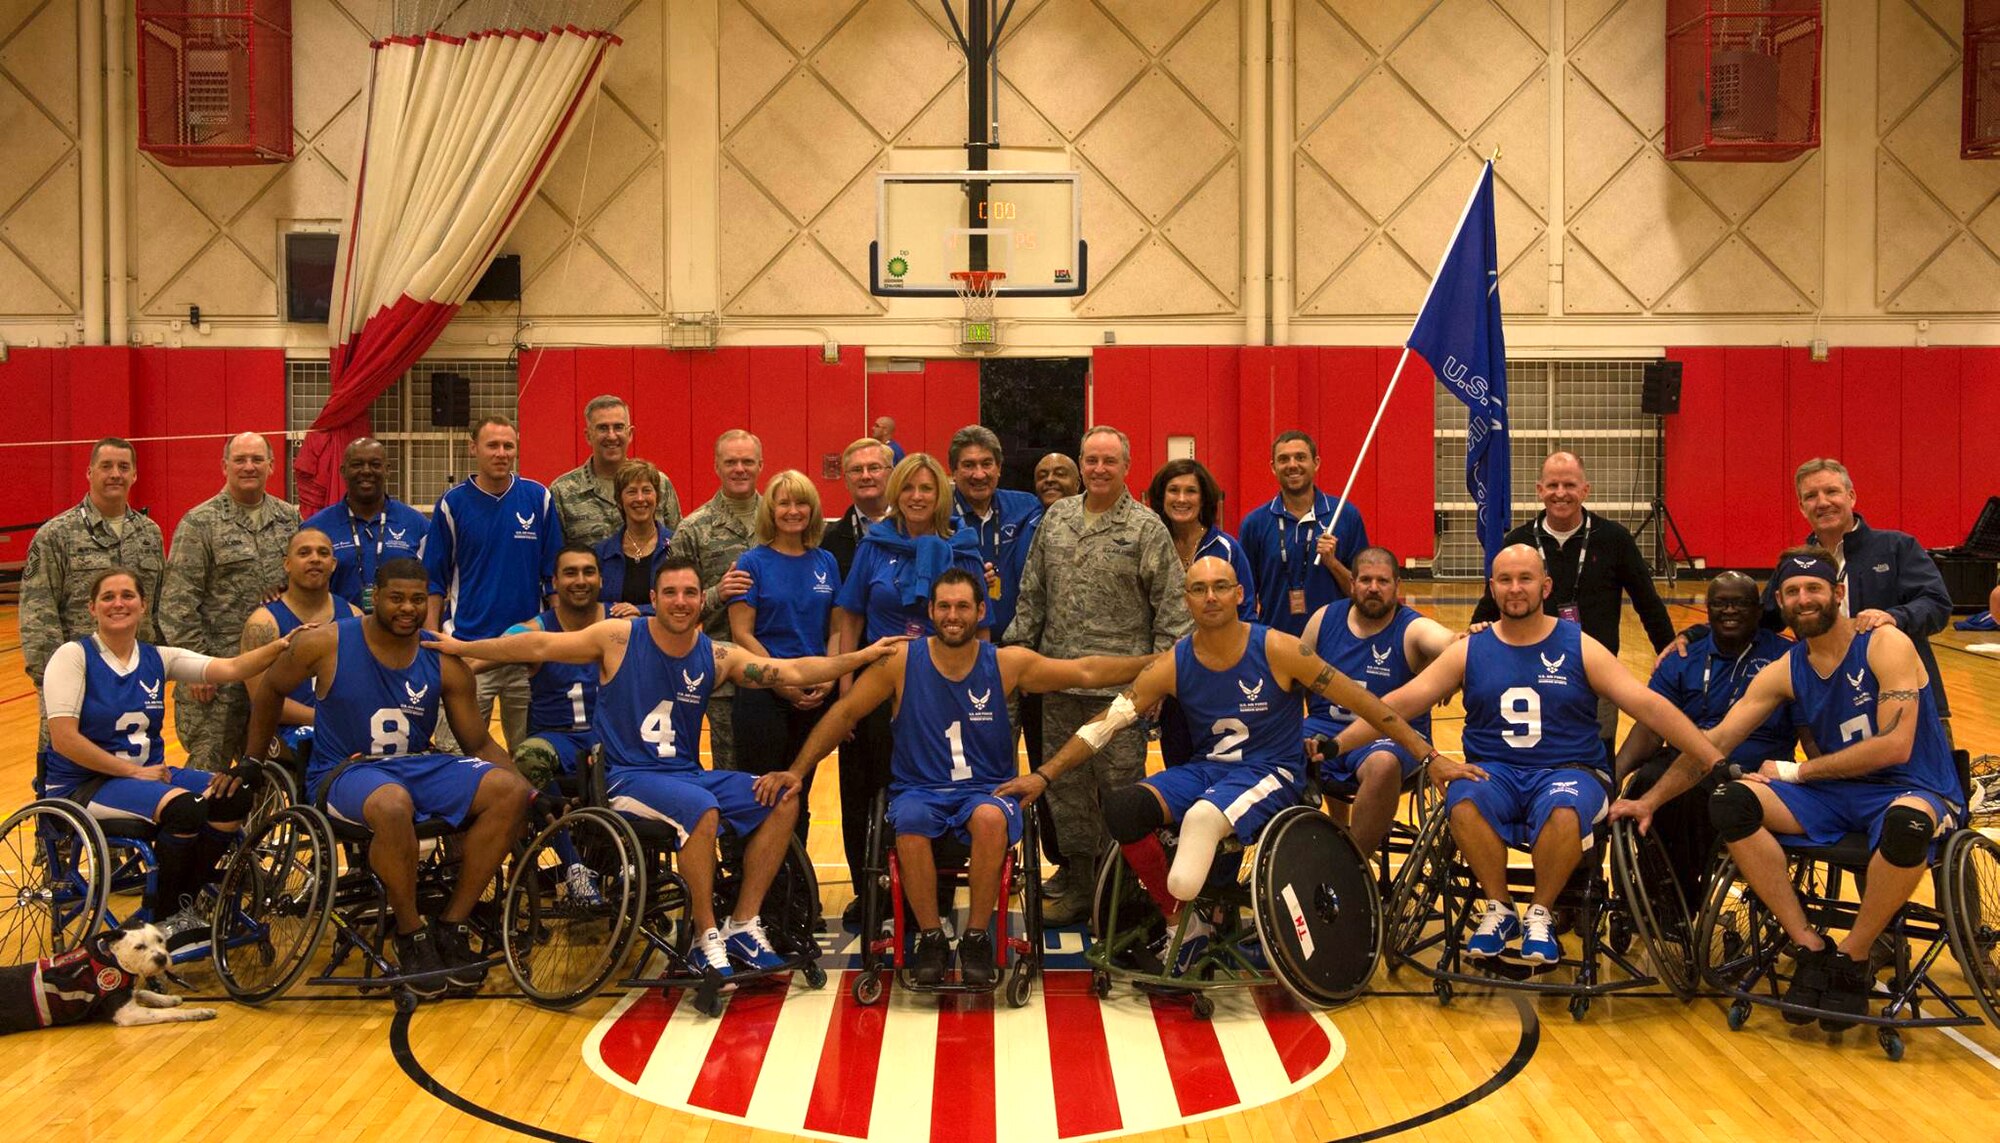 Secretary of the Air Force Deborah Lee James, Chief of Staff of the Air Force Gen. Mark A. Welsh III, and Chief Master Sgt. of the Air Force James A. Cody were in attendance to watch the Air Force take on U.S. Special Operations Command in a game of wheelchair basketball Sept. 30, 2014, during  Warrior Games in Colorado Springs, Colo. Air Force won the game 29-12. (U.S. Air Force photo/Senior Airman Tiffany Denault)